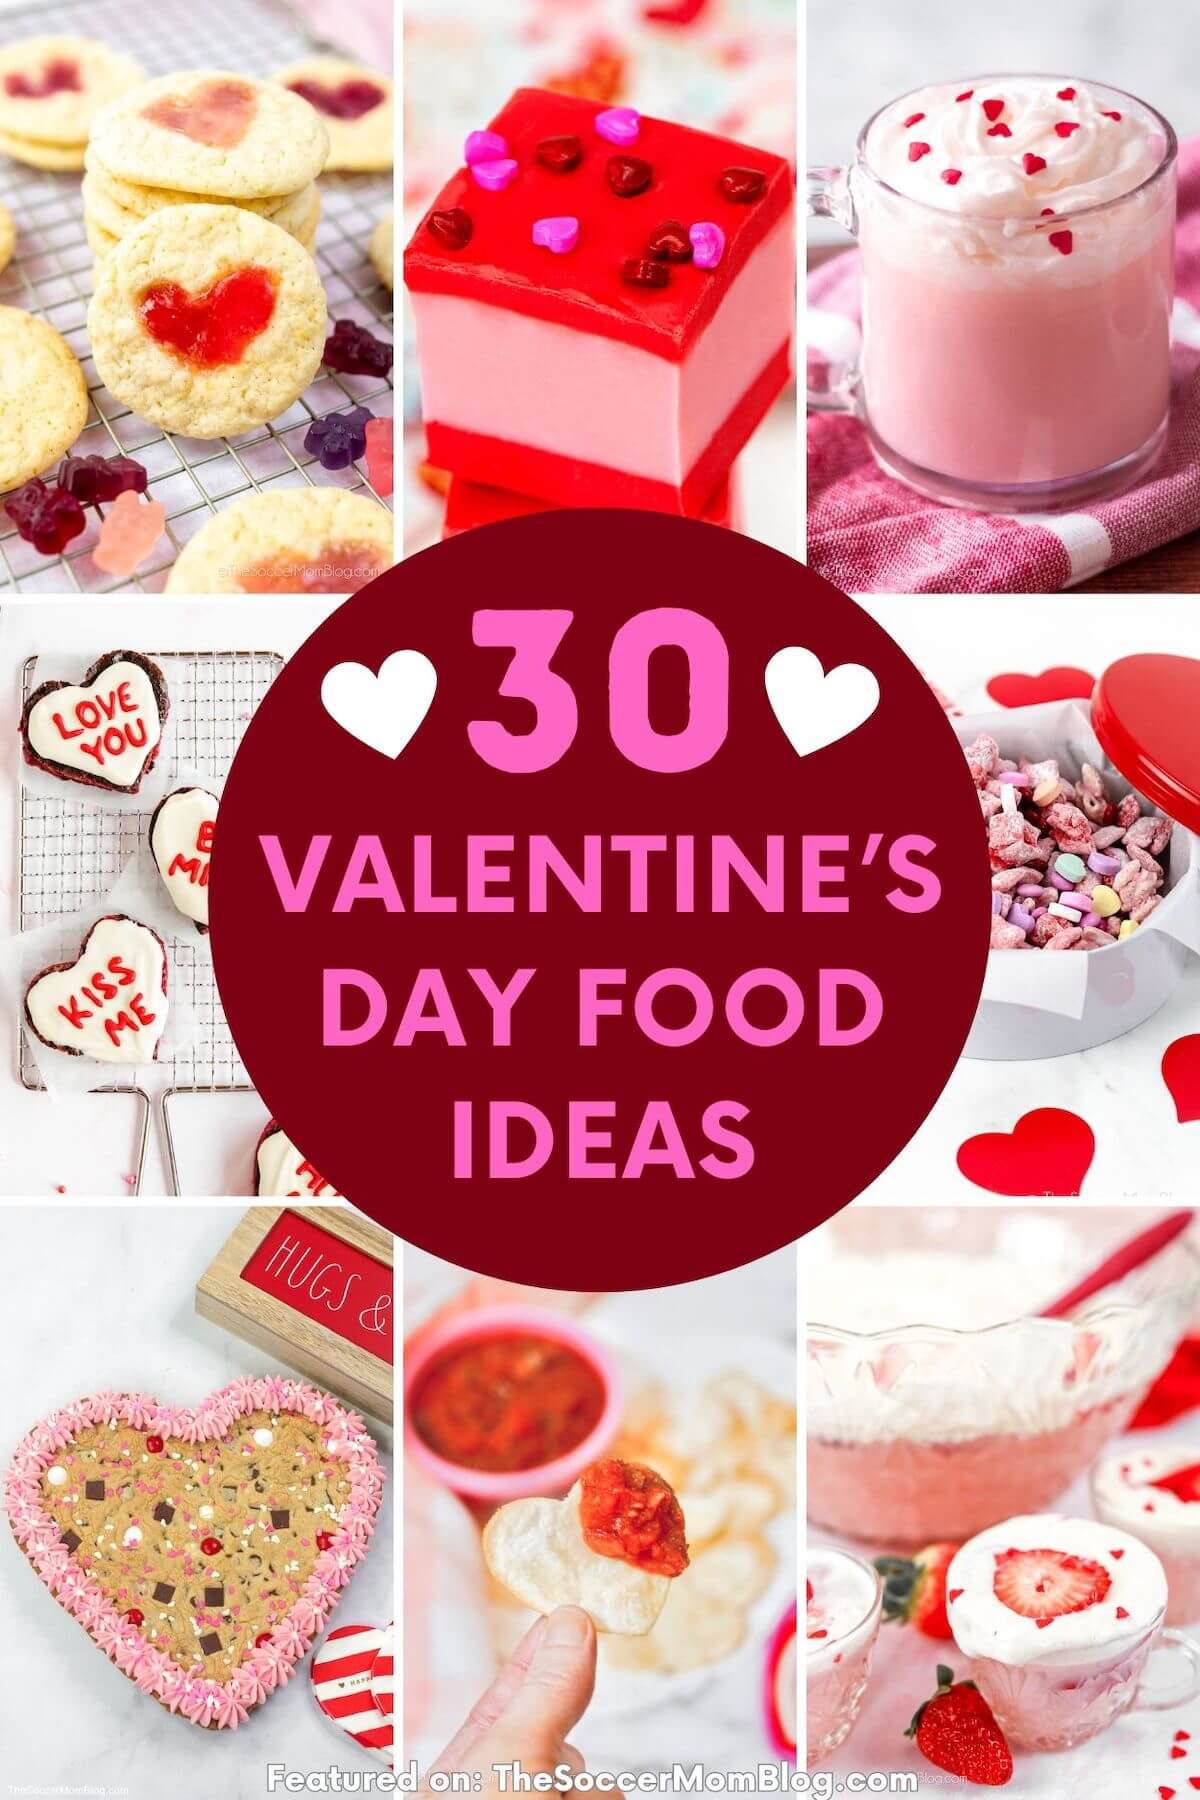 collage image of Valentien themed food; text overlay "30 Valentine's Day Food Ideas".